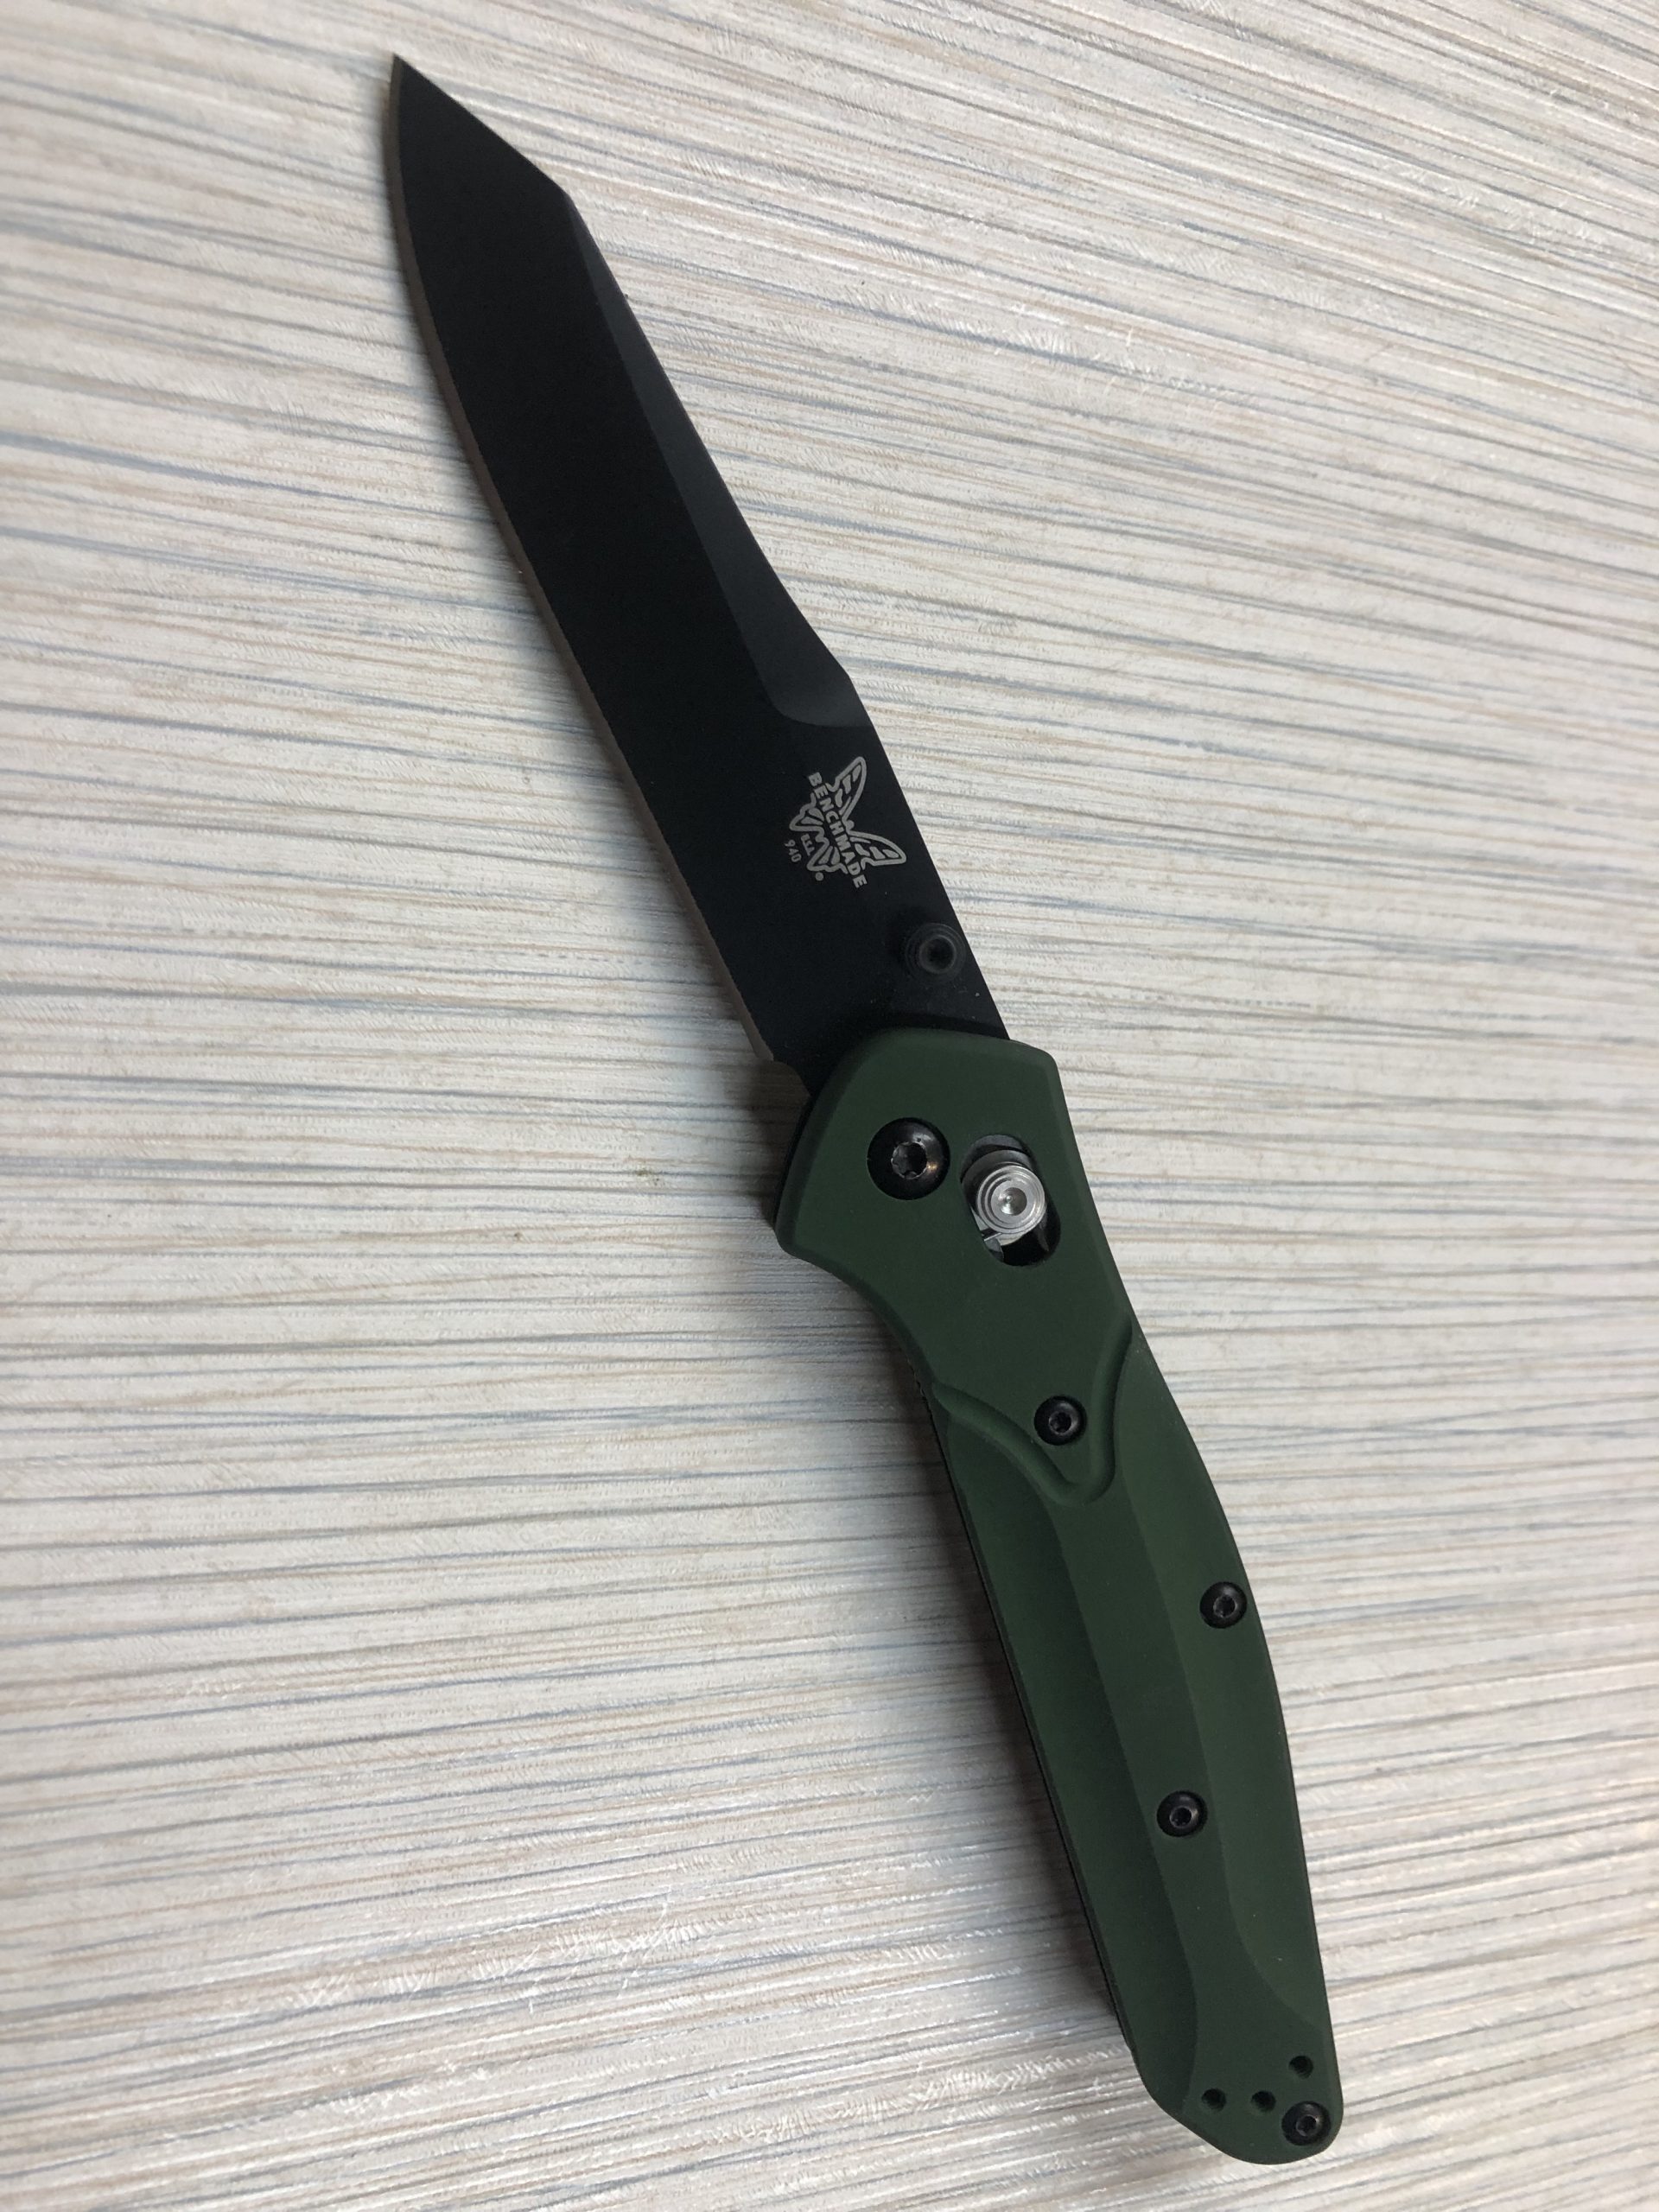 Benchmade 940 Review